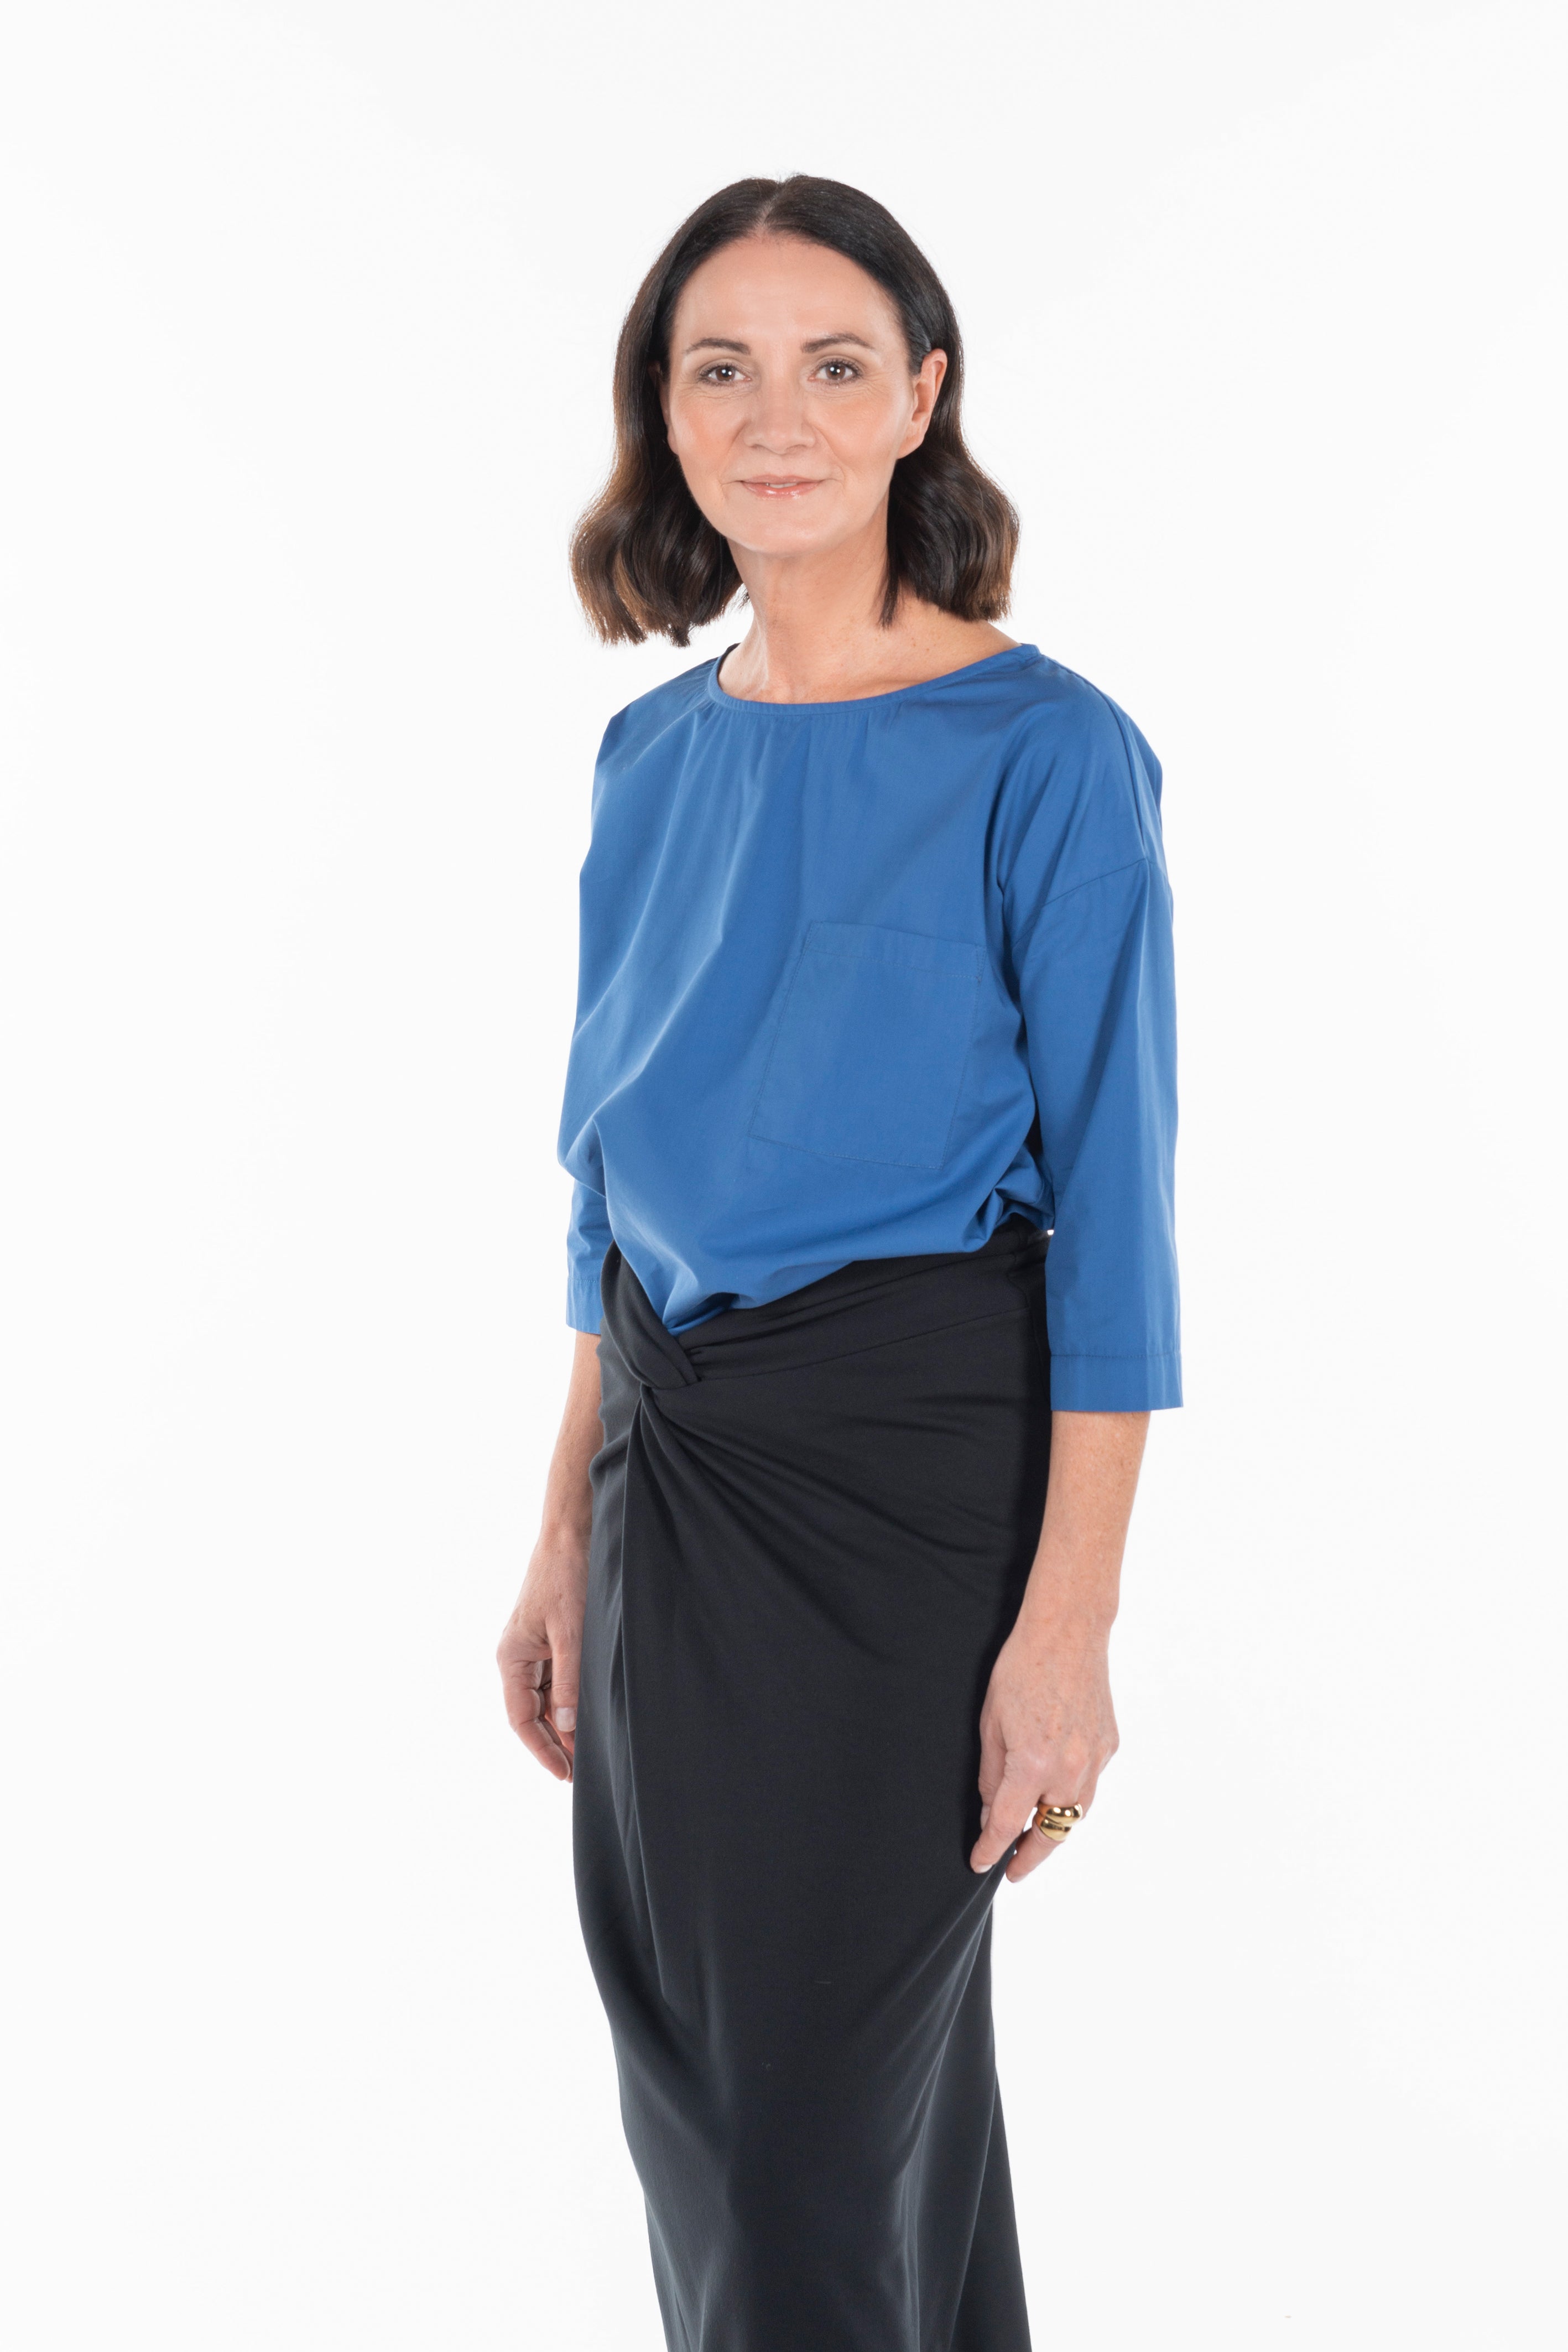 Blouse Code 43 french blue 